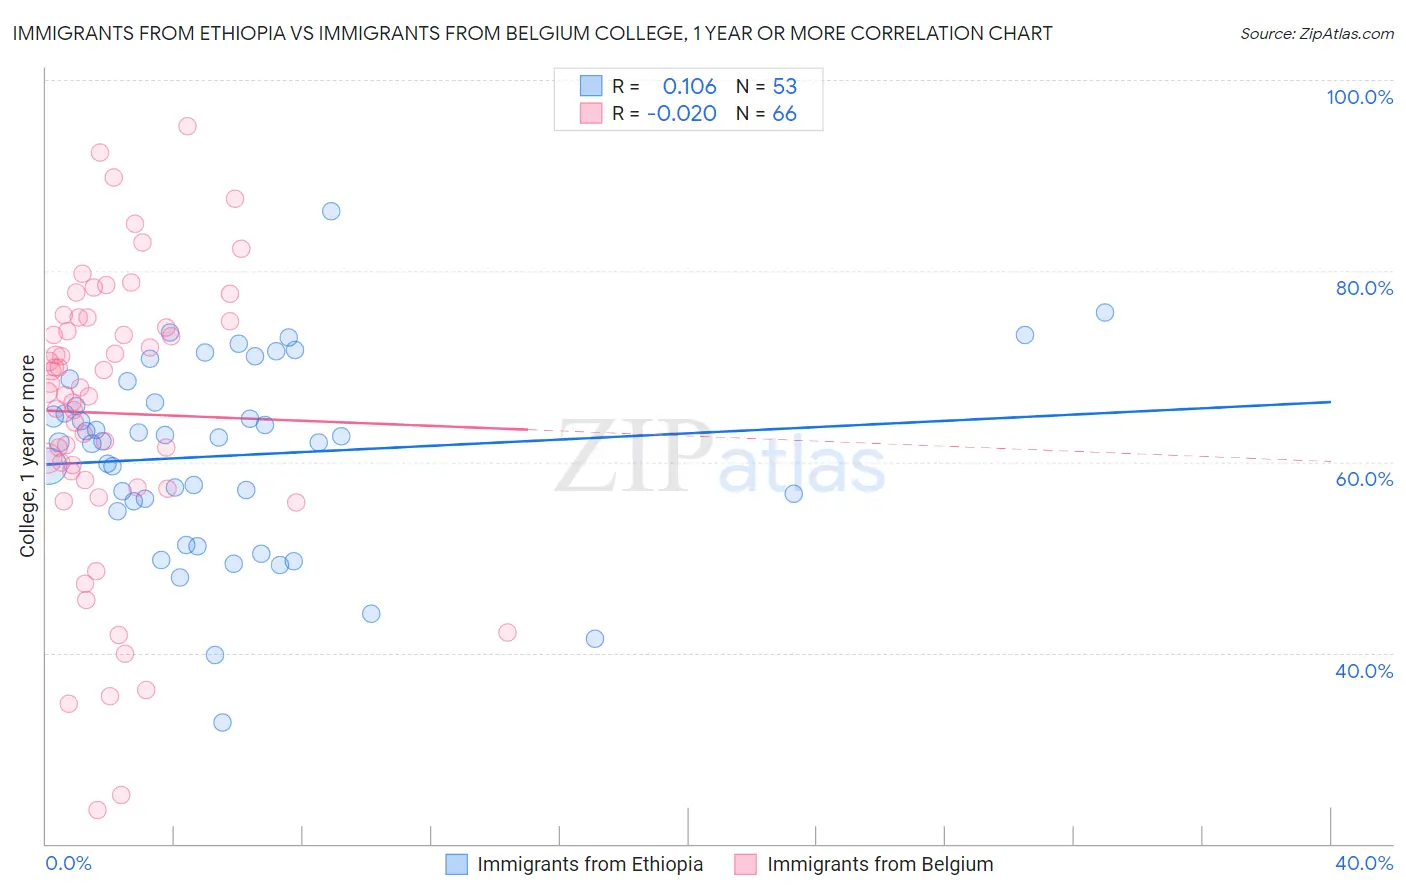 Immigrants from Ethiopia vs Immigrants from Belgium College, 1 year or more